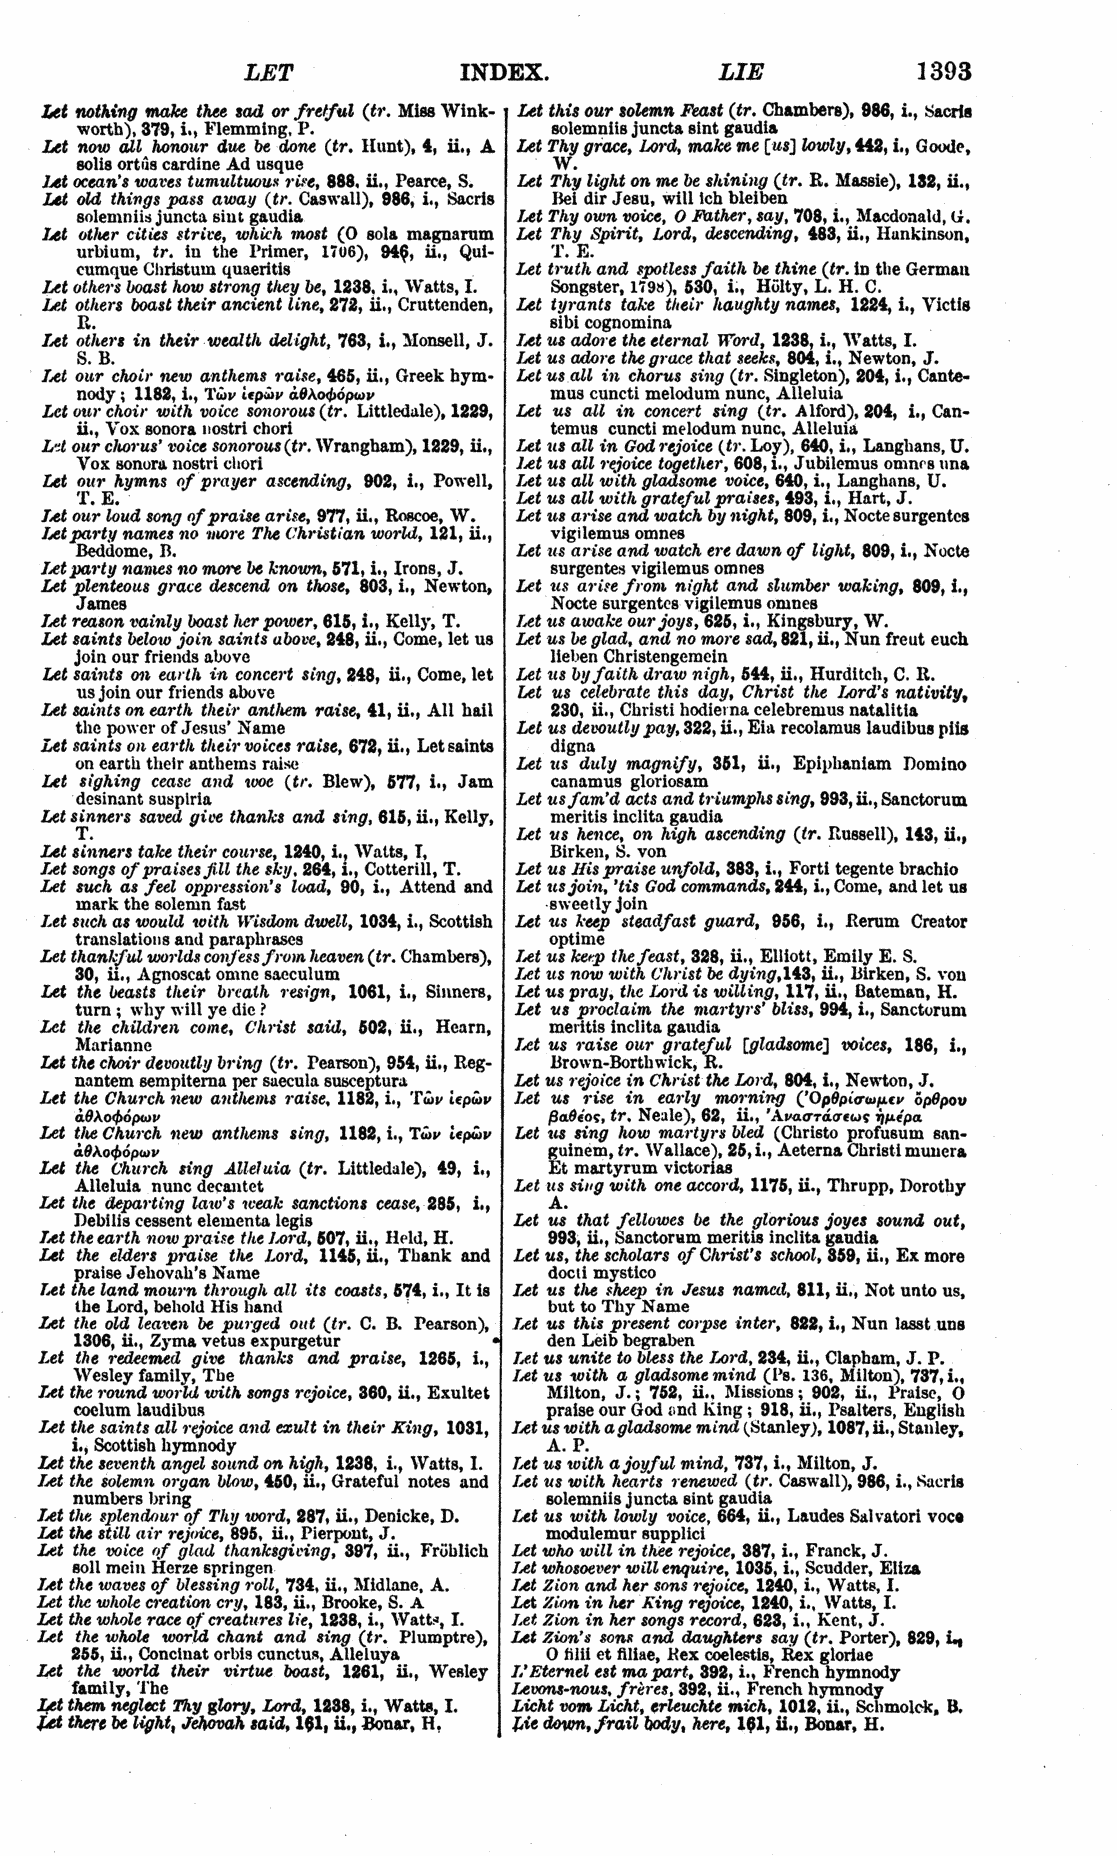 Image of page 1393